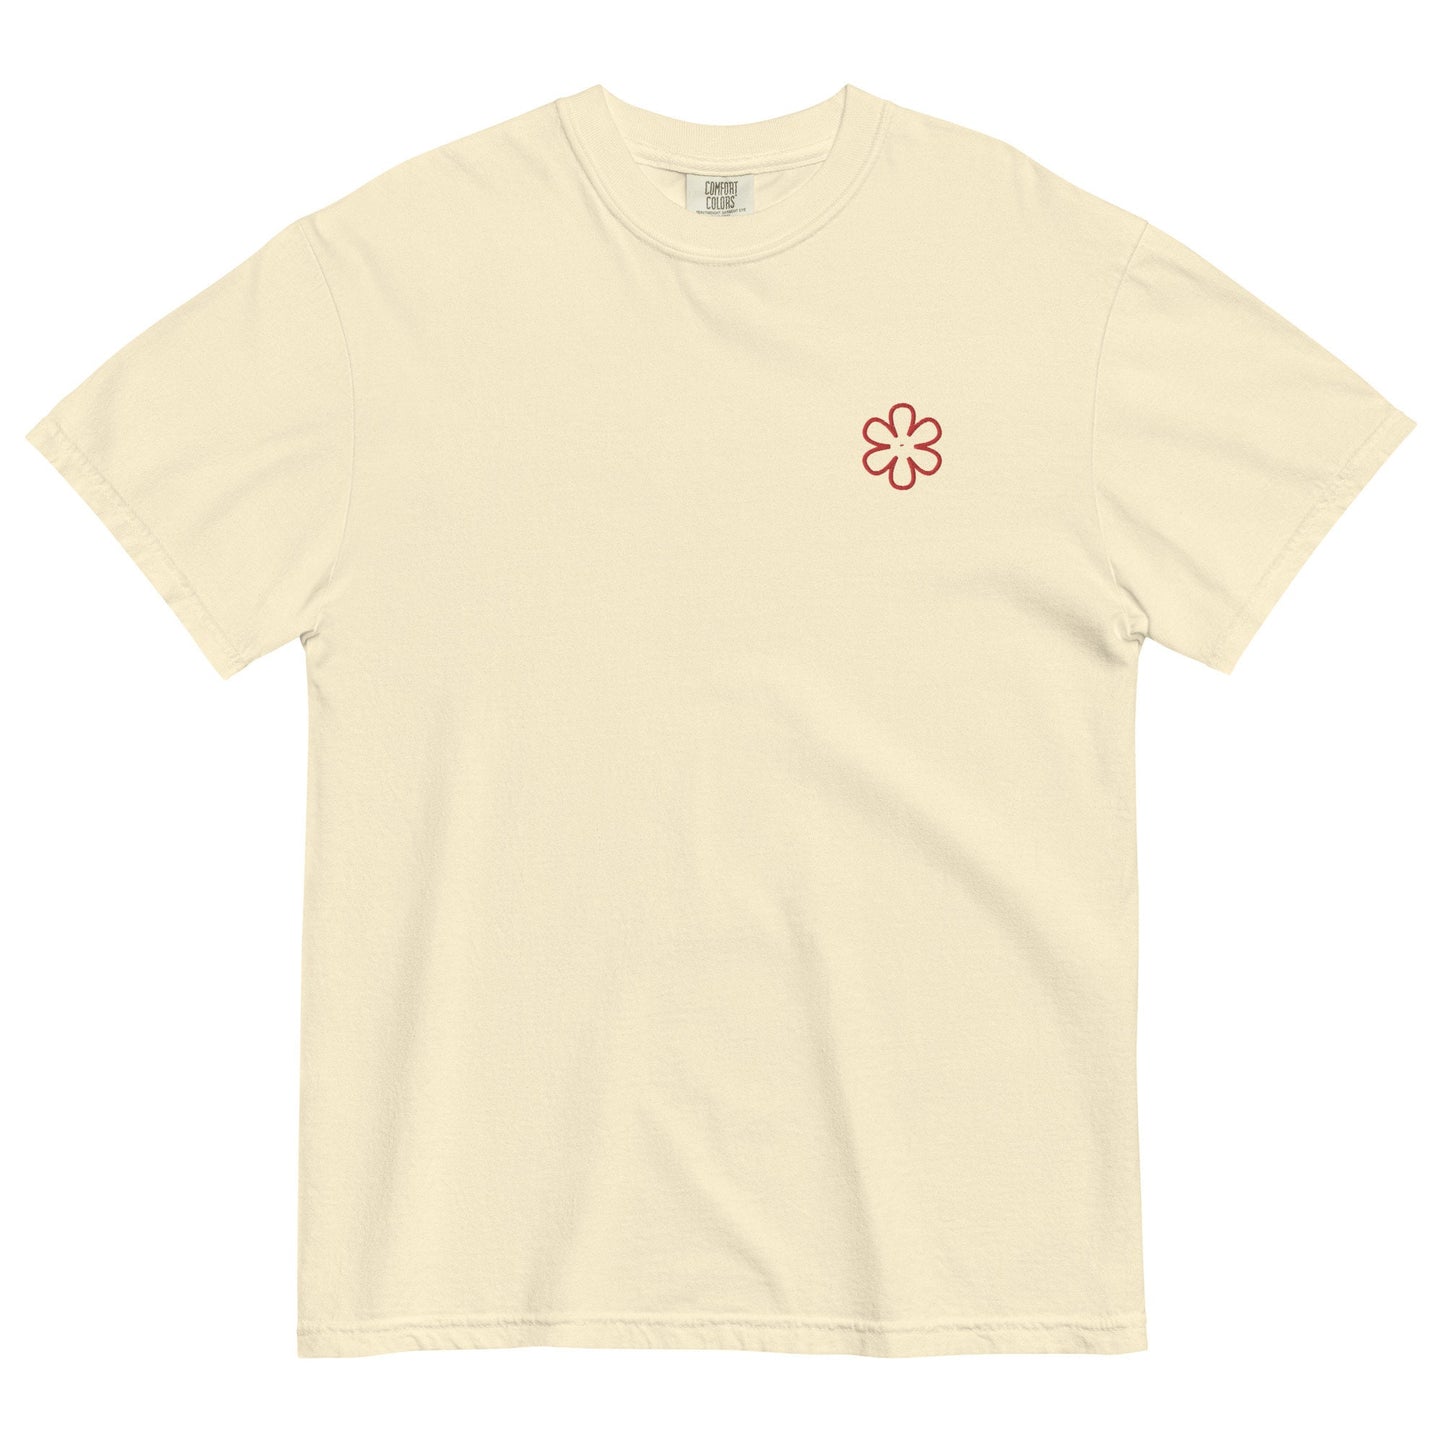 Culinary Star T Shirt - Gift for Foodies & Restauranteur - Minimalist Embroidered Cotton Shirt